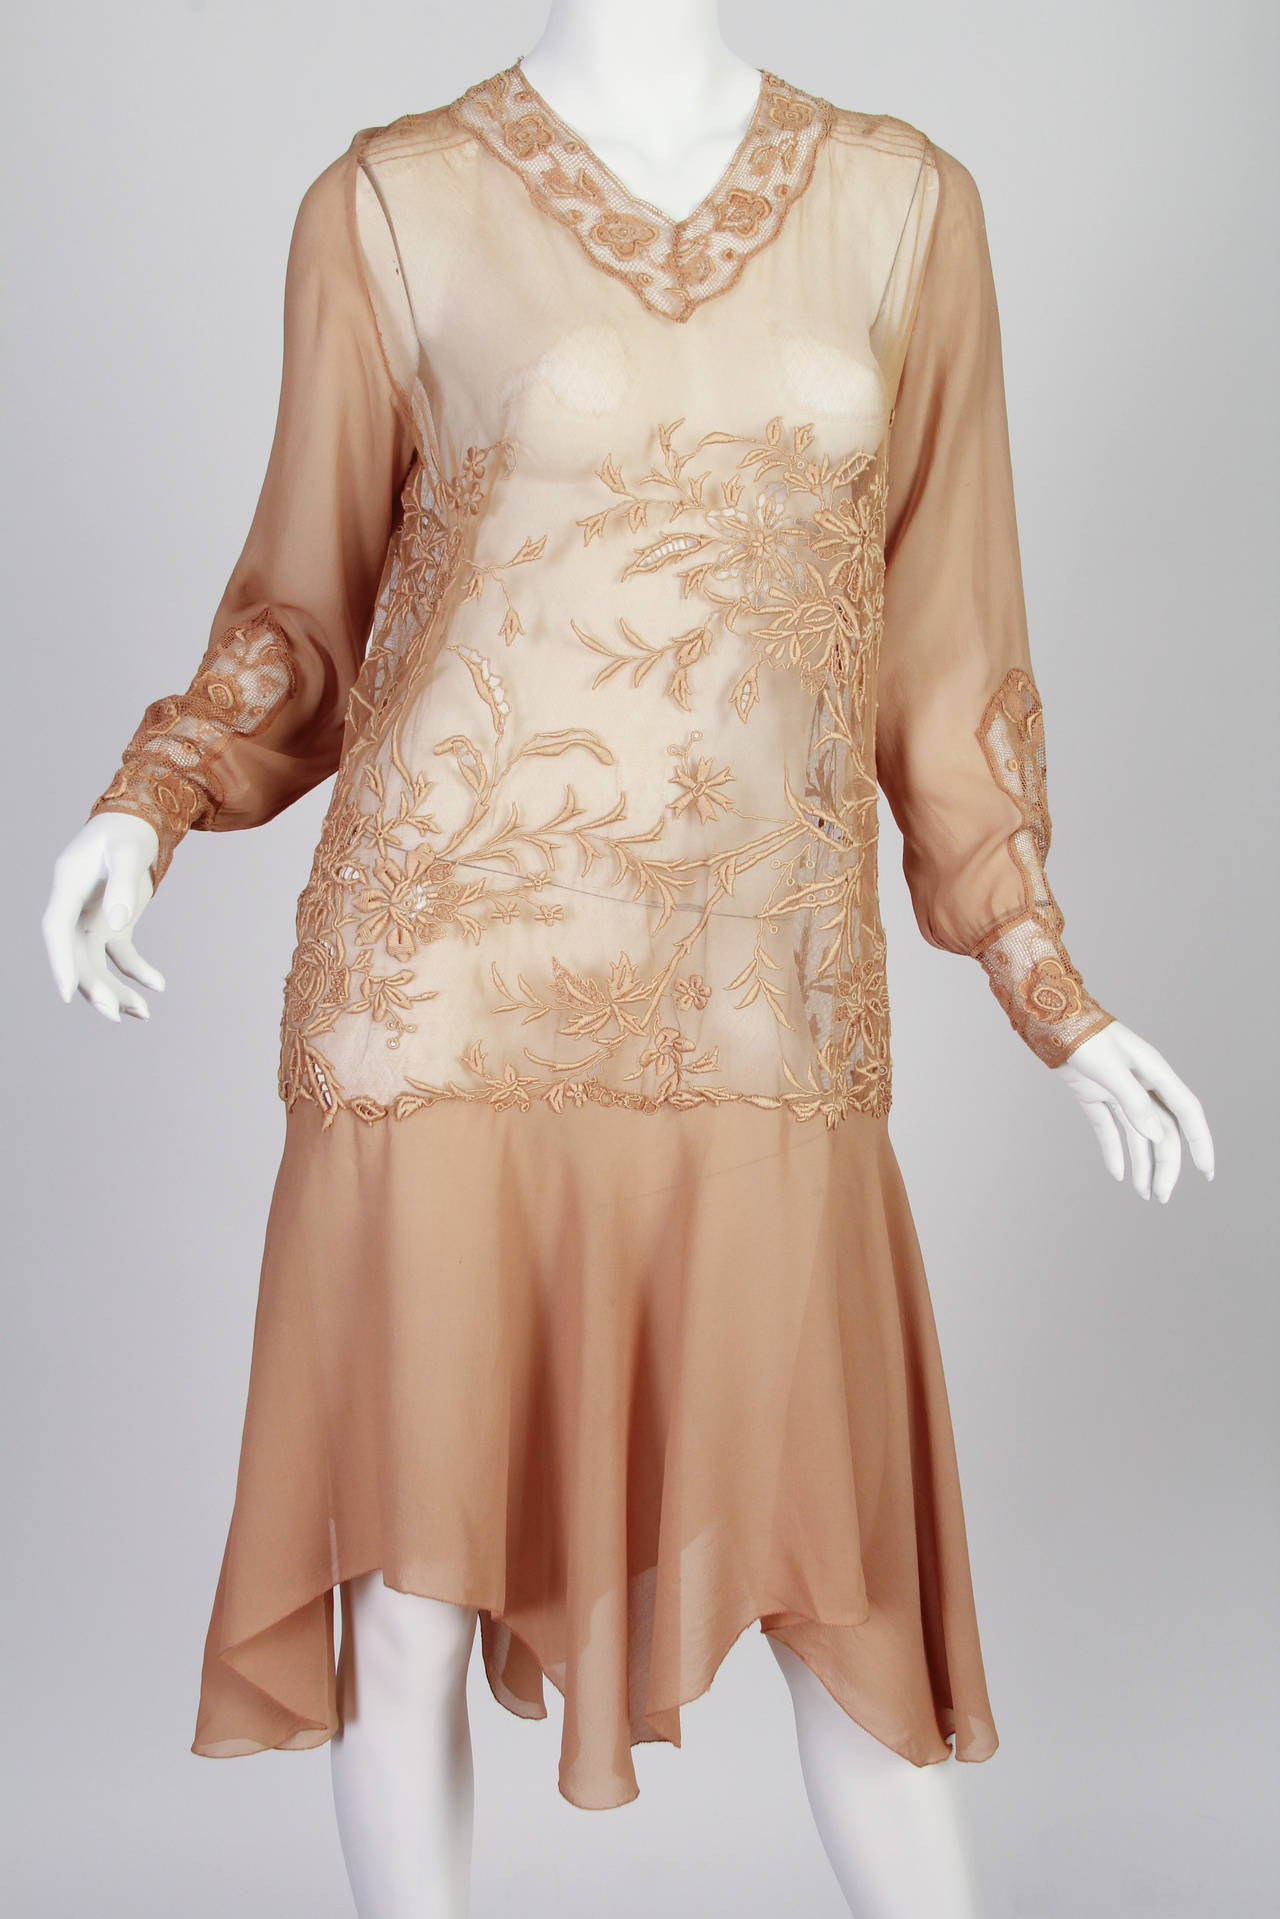 Very Fine Hand Embroidered Lace, Net, and Silk Dress 1